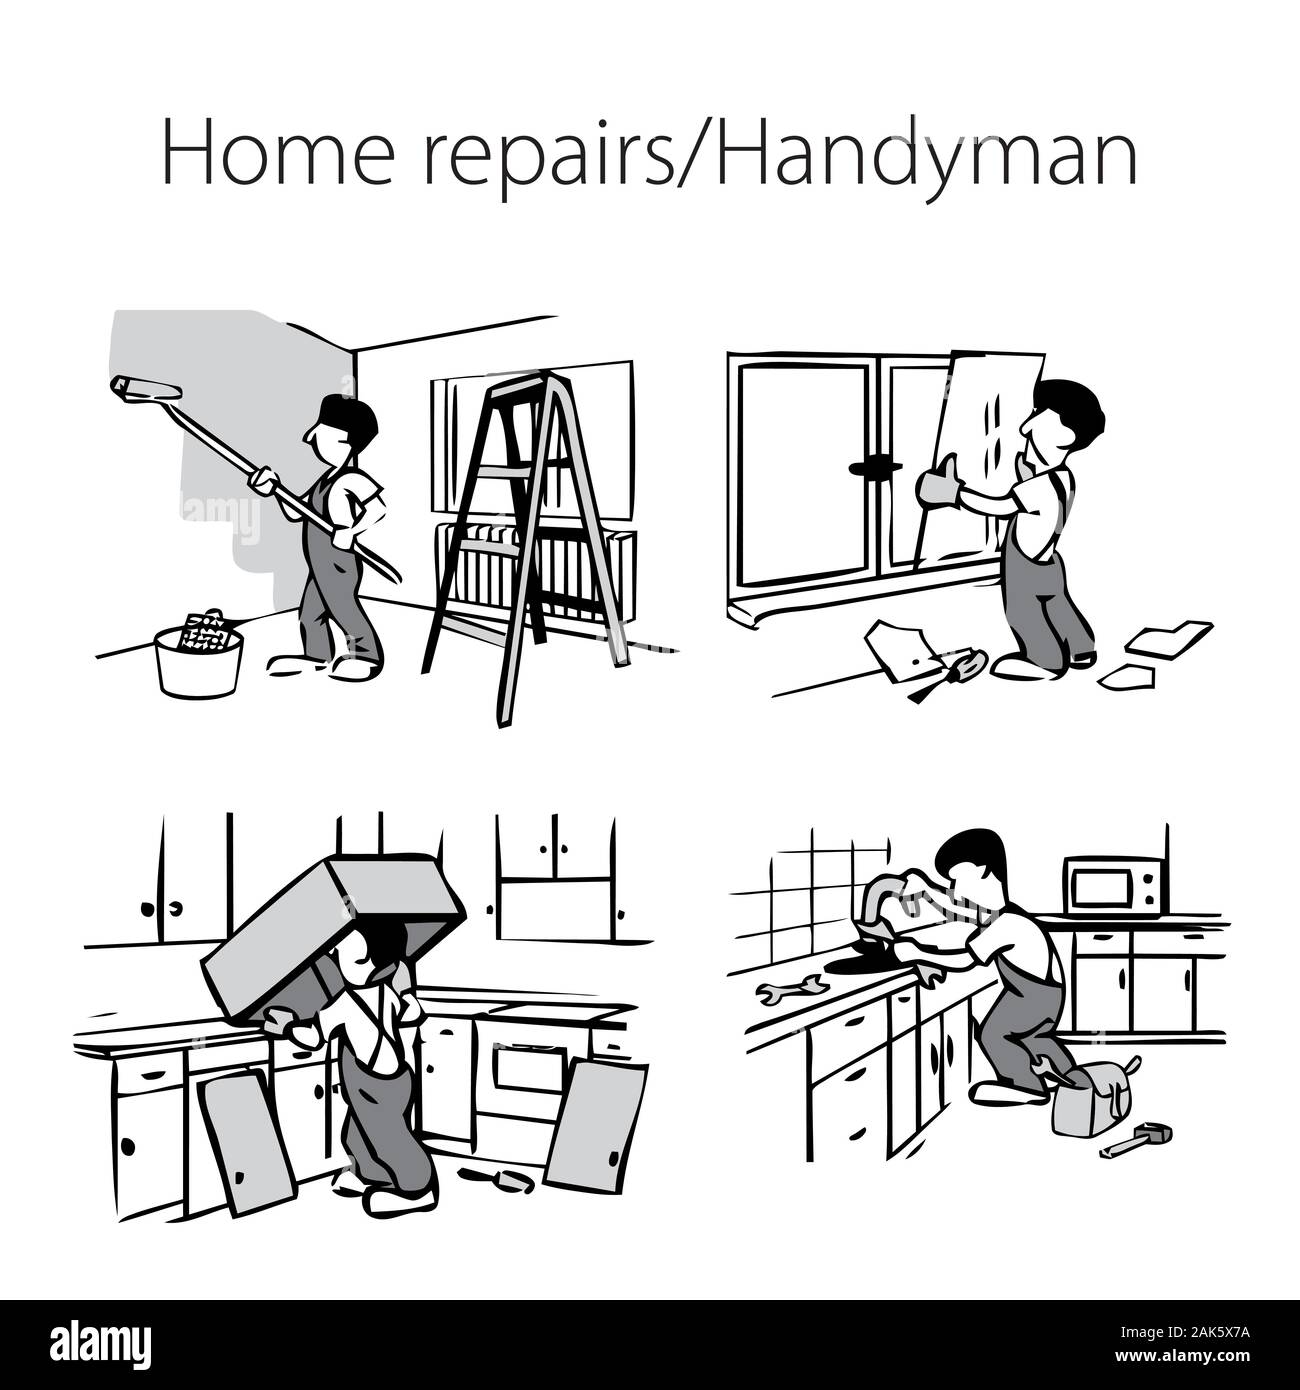 Set of black and white illustrations with home repairs theme (handyman-repairman in various repair work), vector illustrations Stock Vector